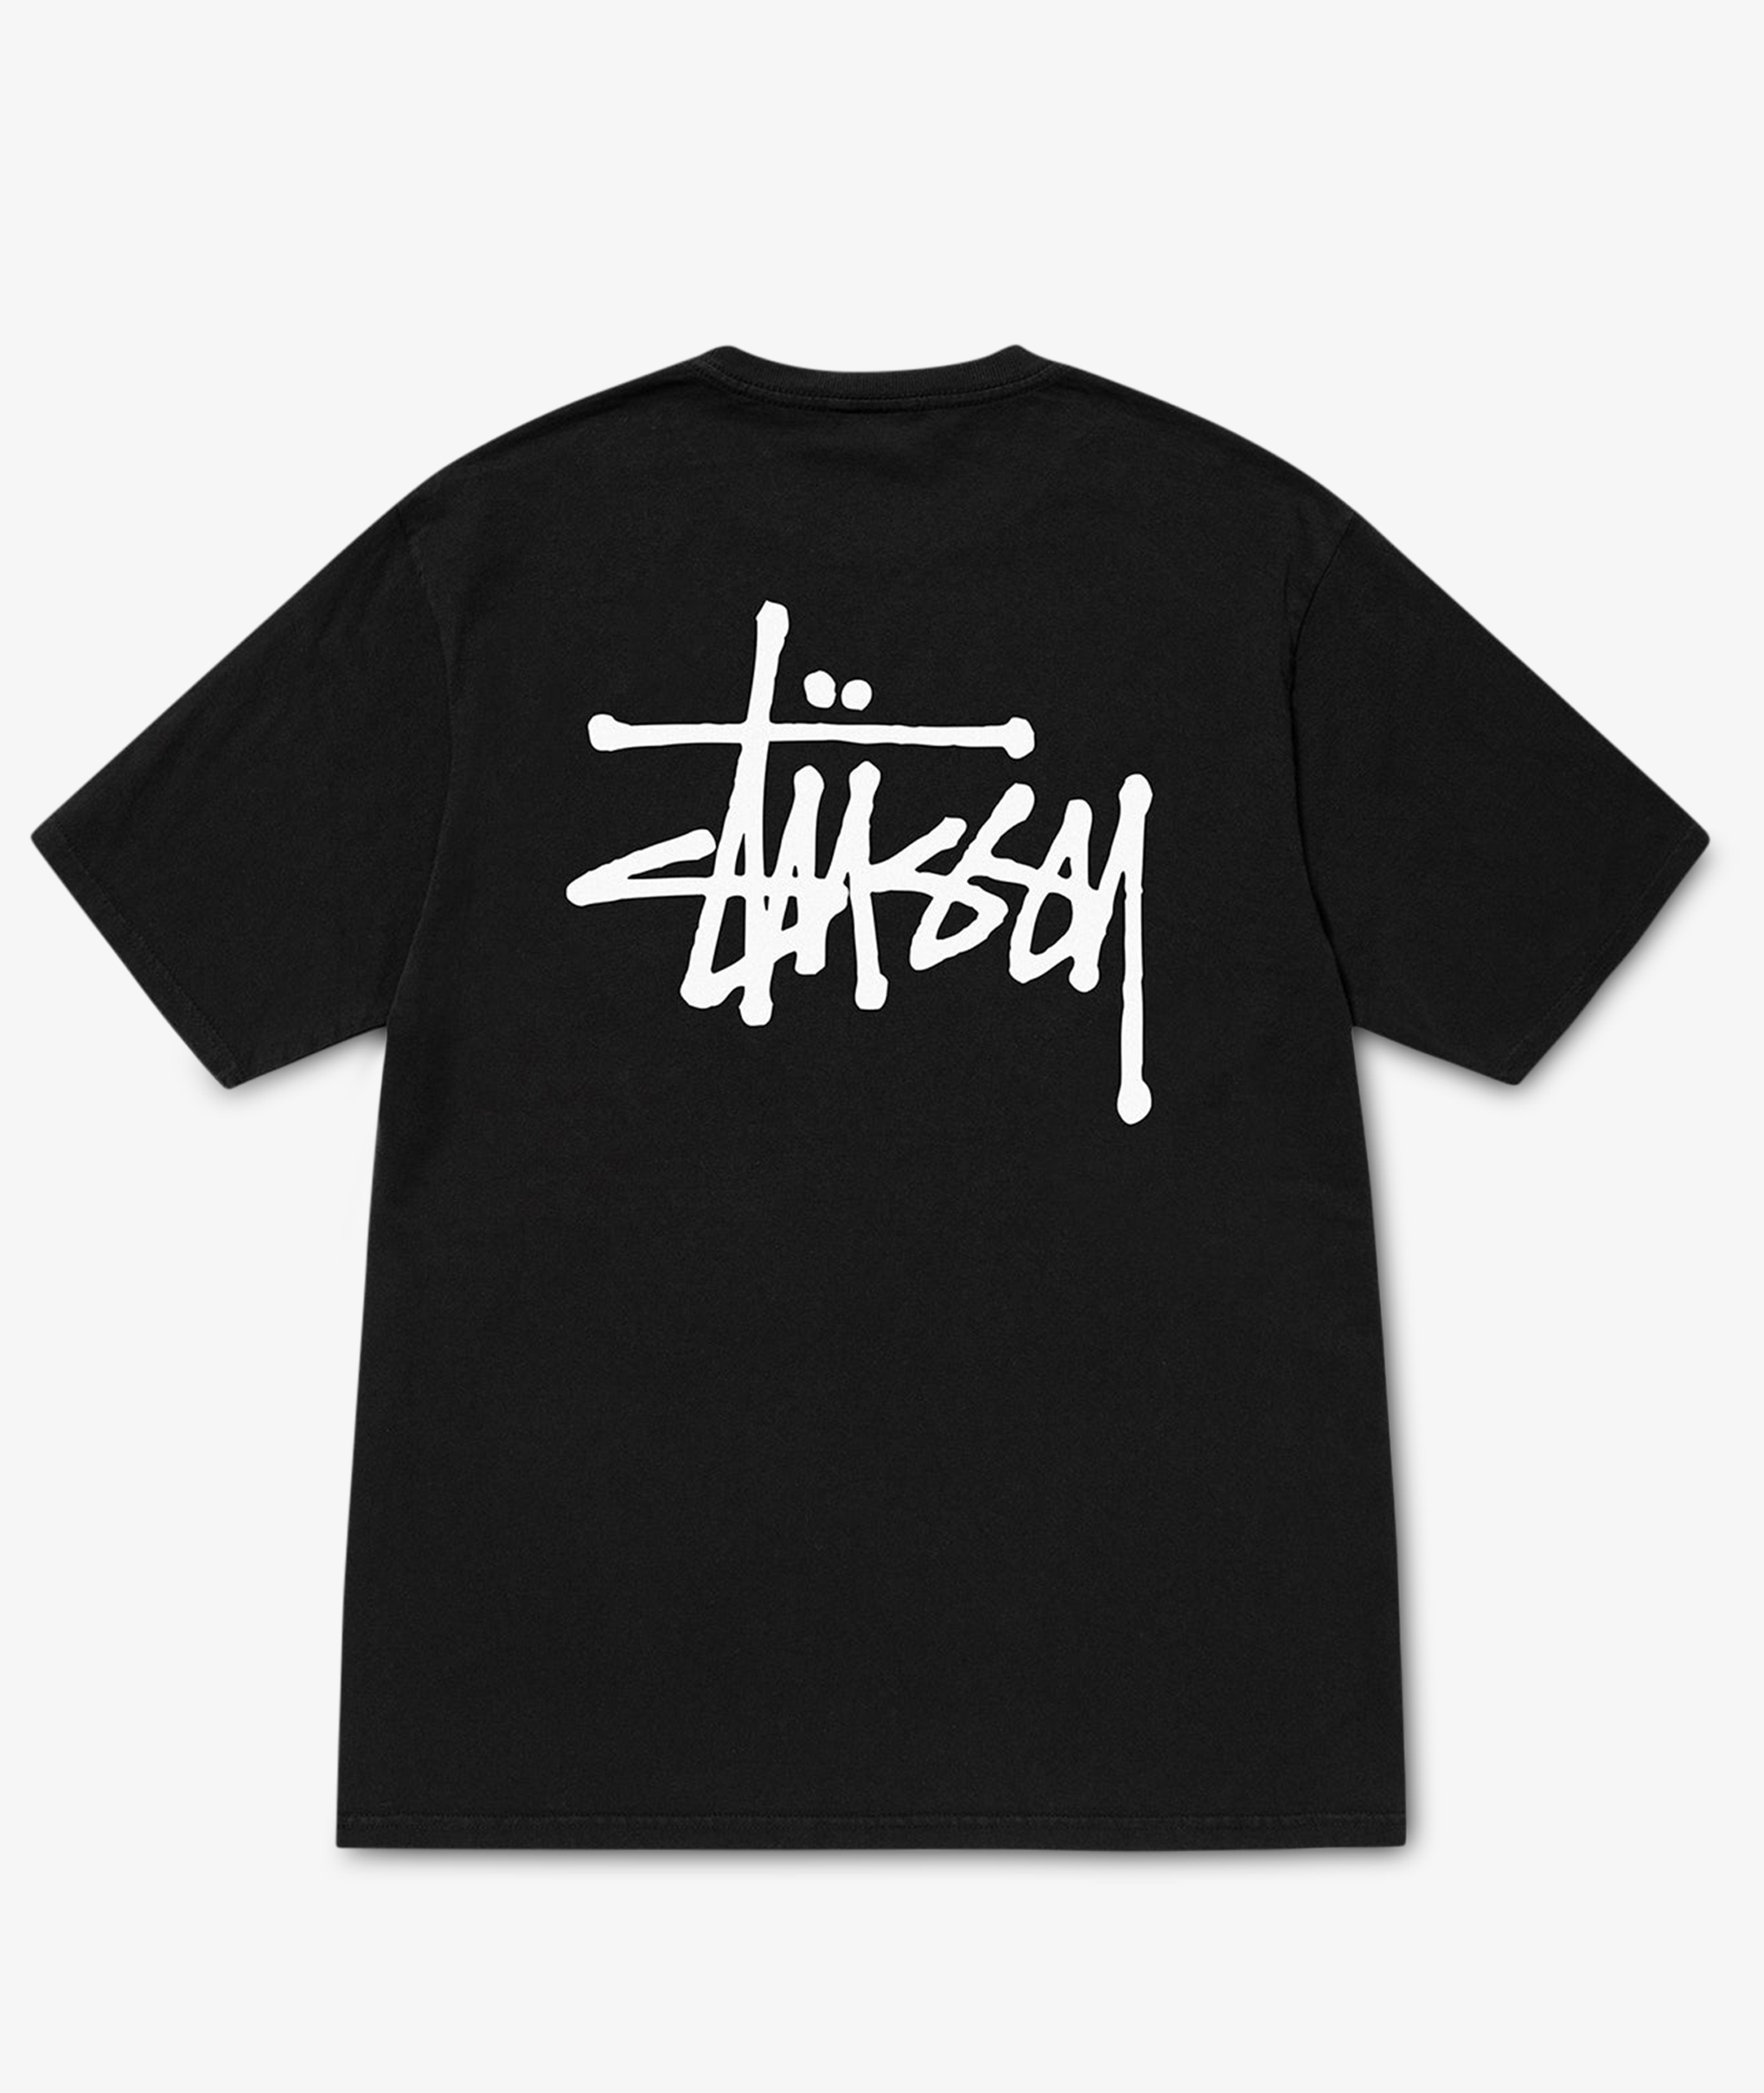 Norse Store | Shipping Worldwide - Stüssy Basic Stussy Pig. Dyed Tee ...